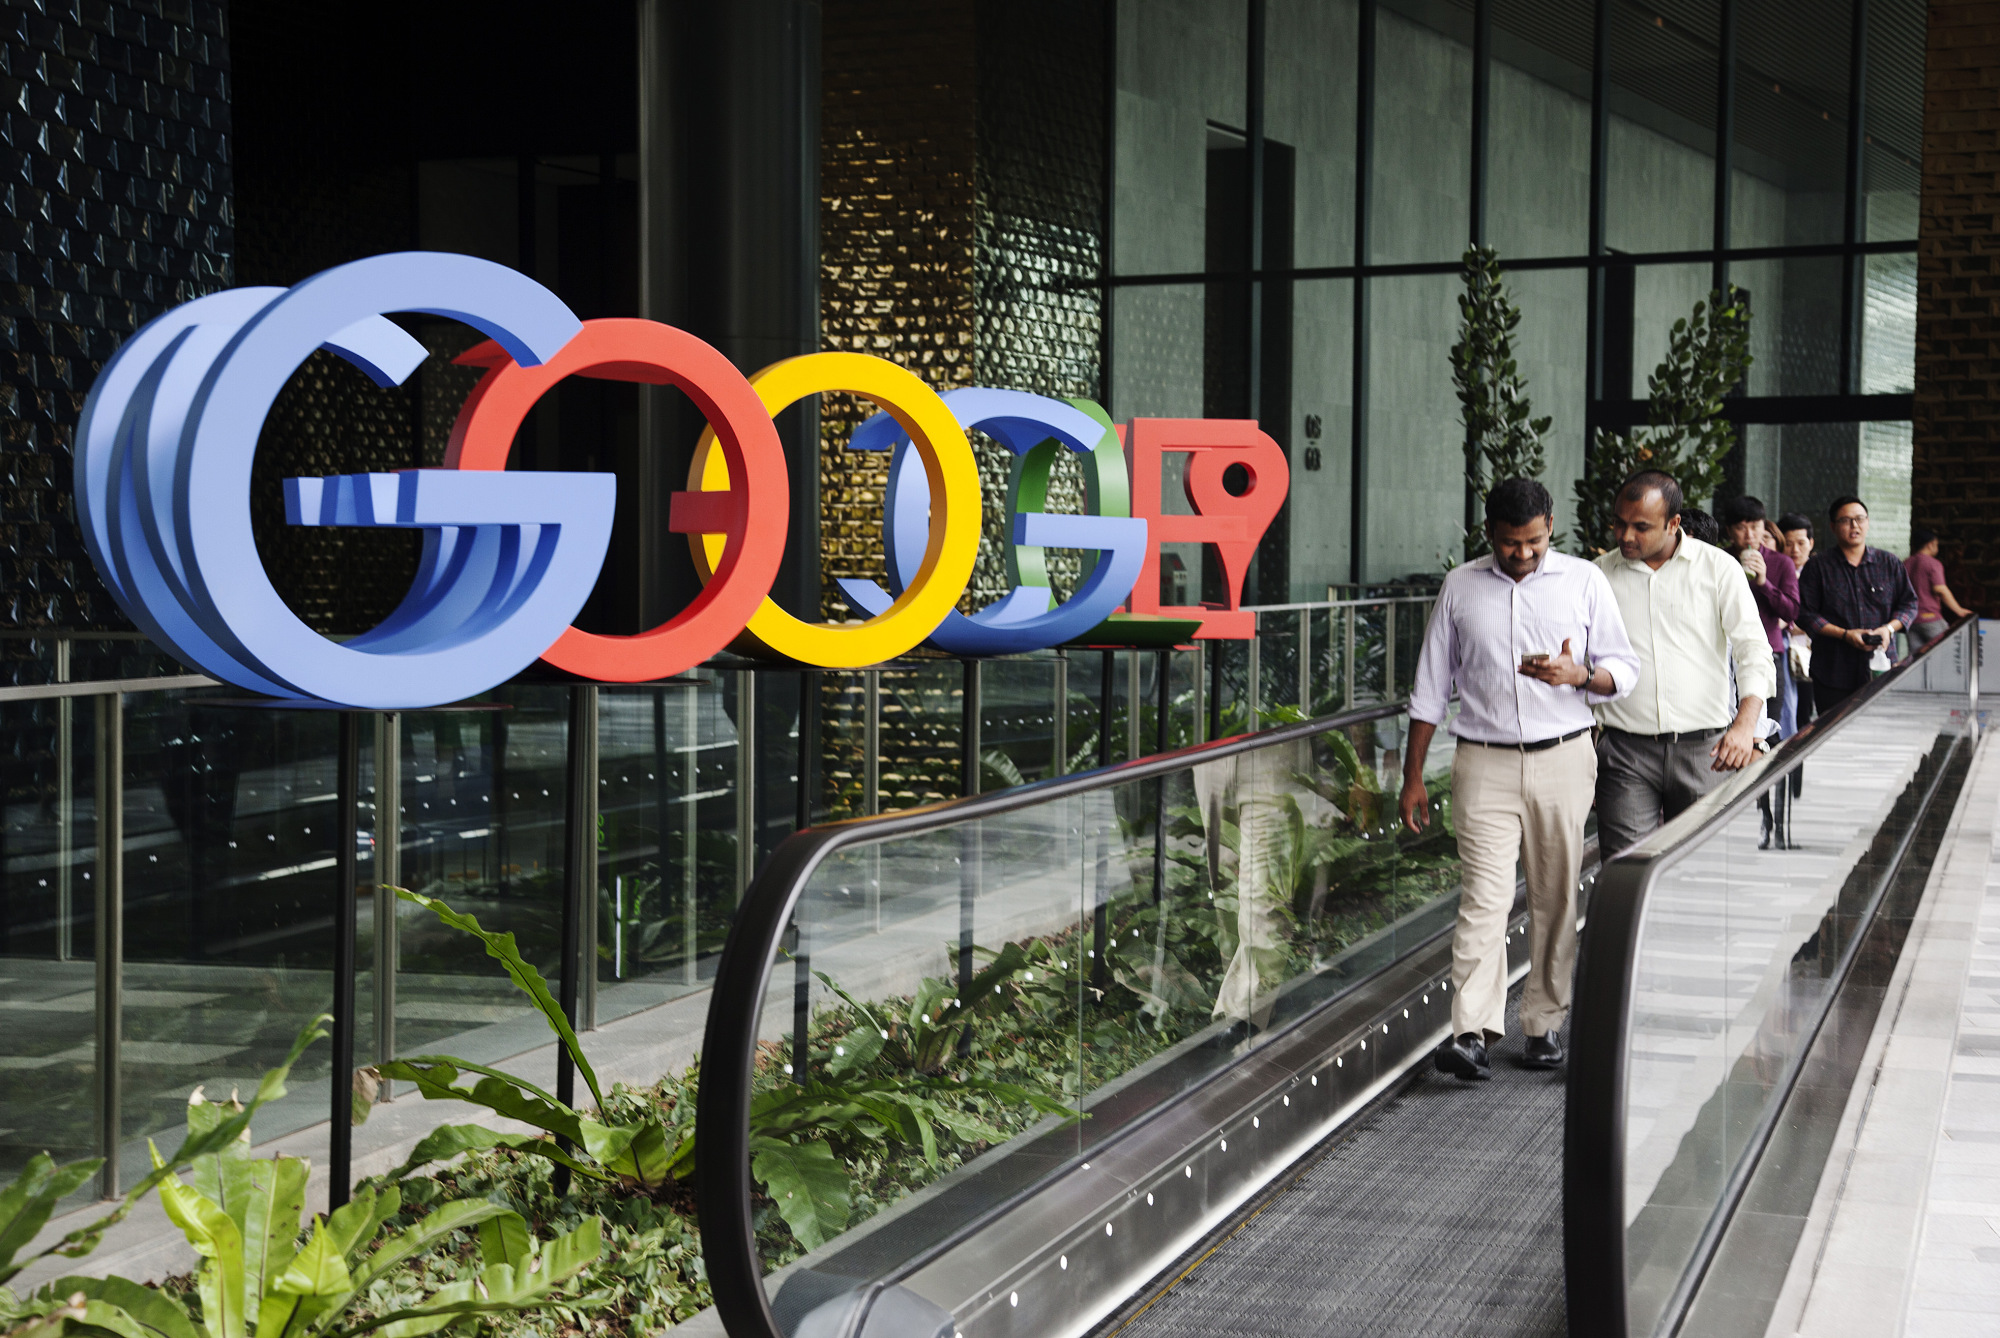 Singapore Prime Minister Lee Hsien Loong Attends The Official Opening Of The New Google Inc. APAC Headquarters